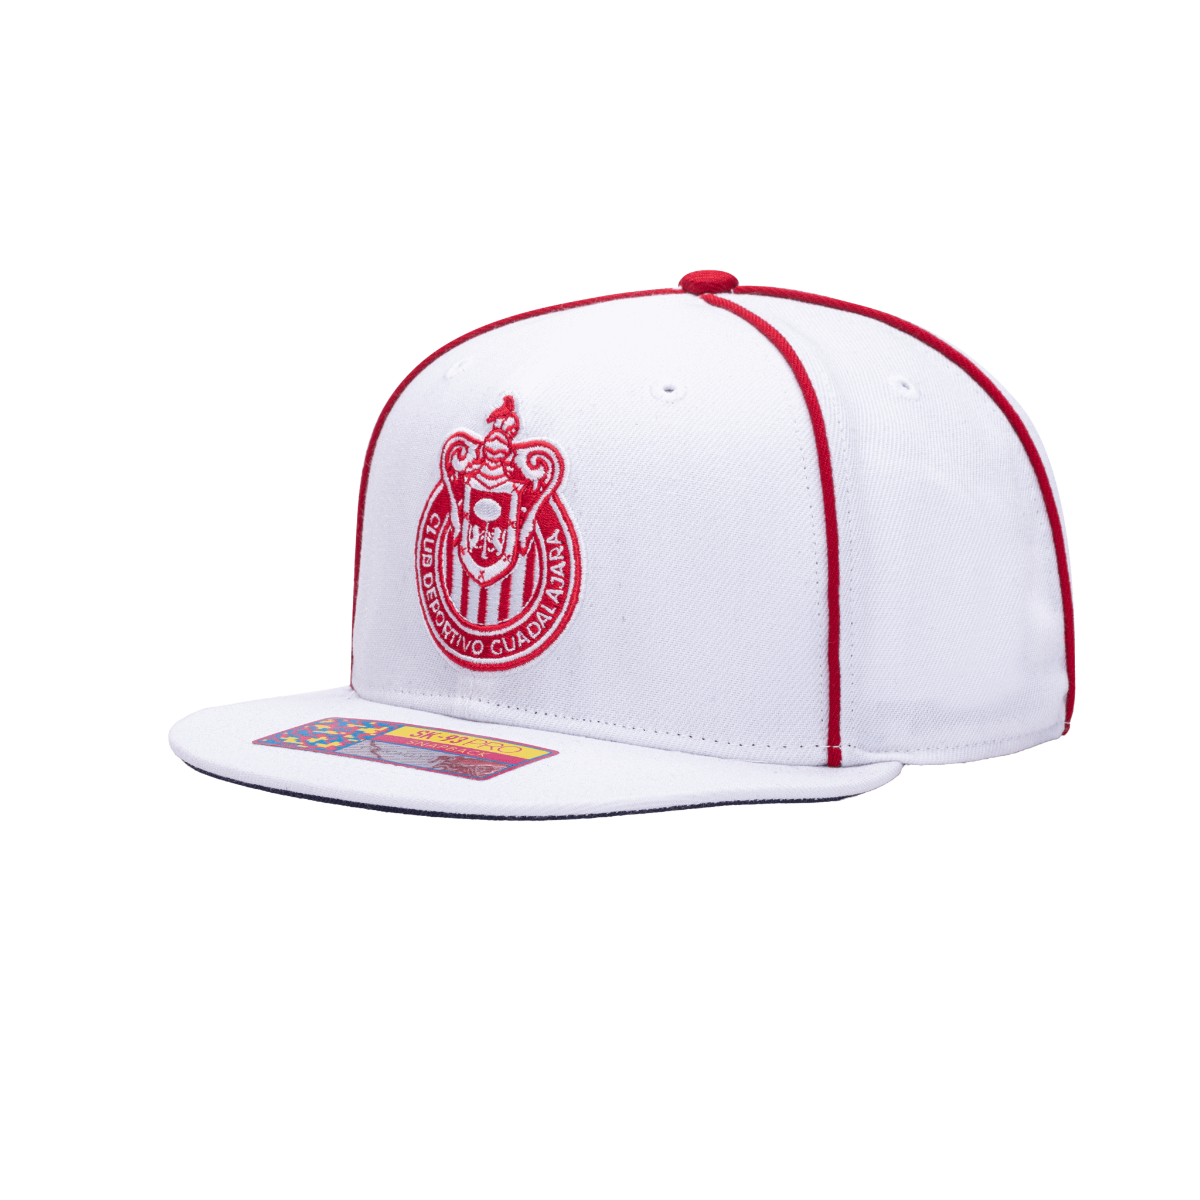 FI Collection Chivas Cali Day Snapback Hat - White-Red (Diagonal 1)